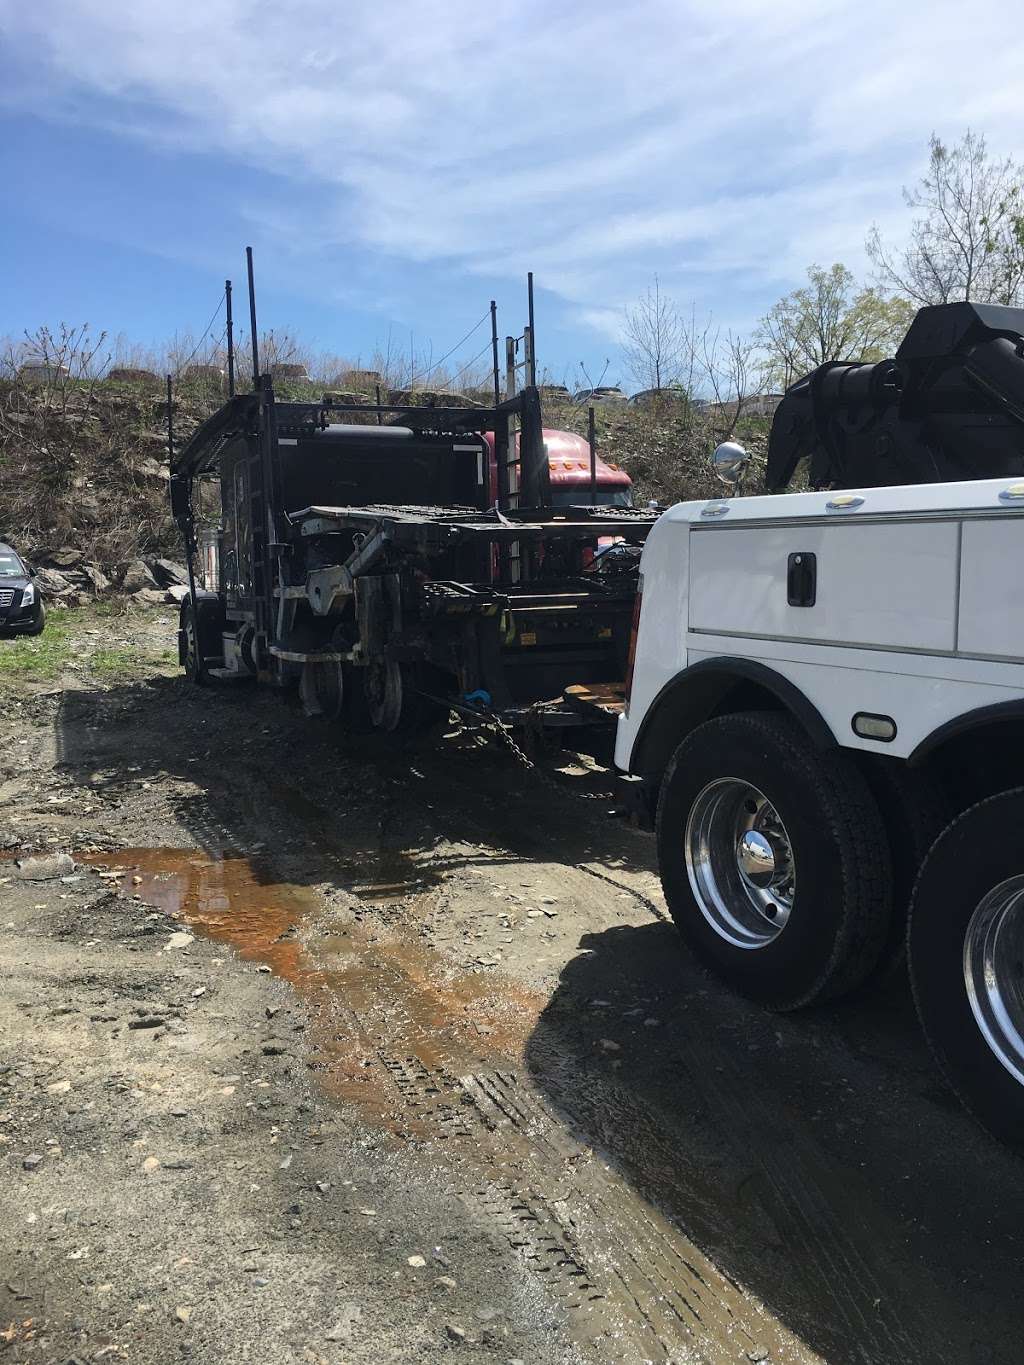 RNR Auto & Towing | 254 Saw Mill River Rd, Yonkers, NY 10701 | Phone: (914) 423-0678